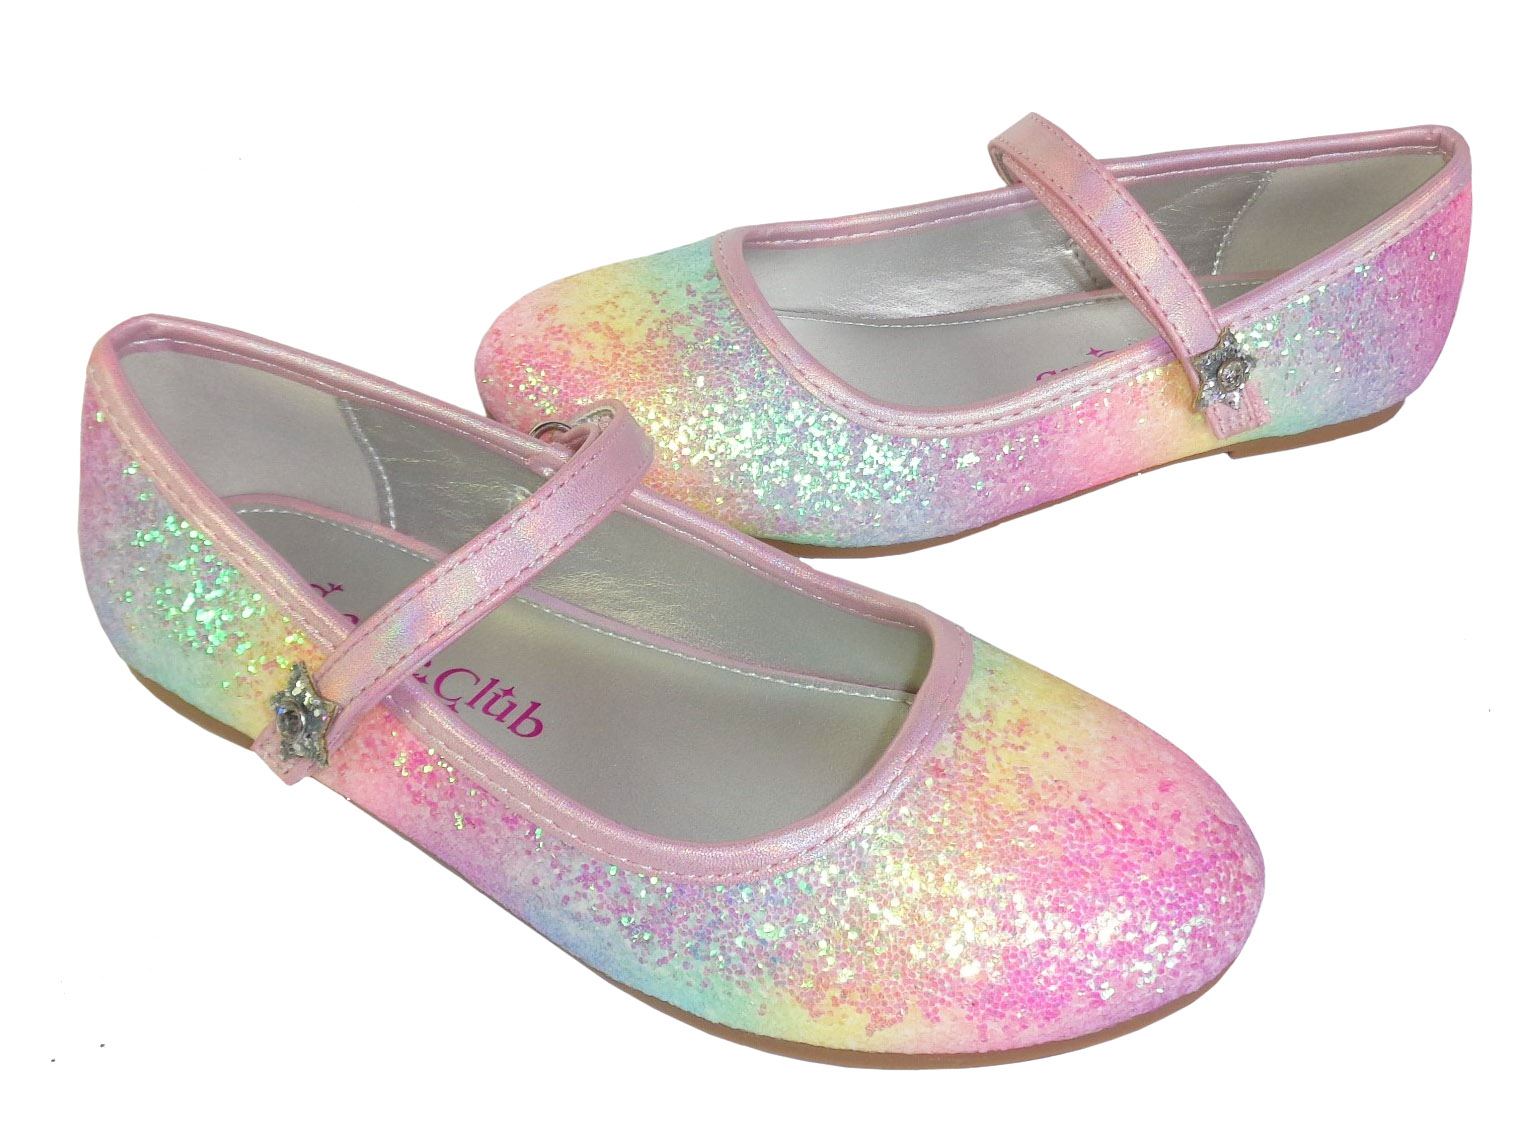 Girls Pink&Black Spot On Party Summer Sparkly Dolly Shoes UK Sizes 10-2 H2428 